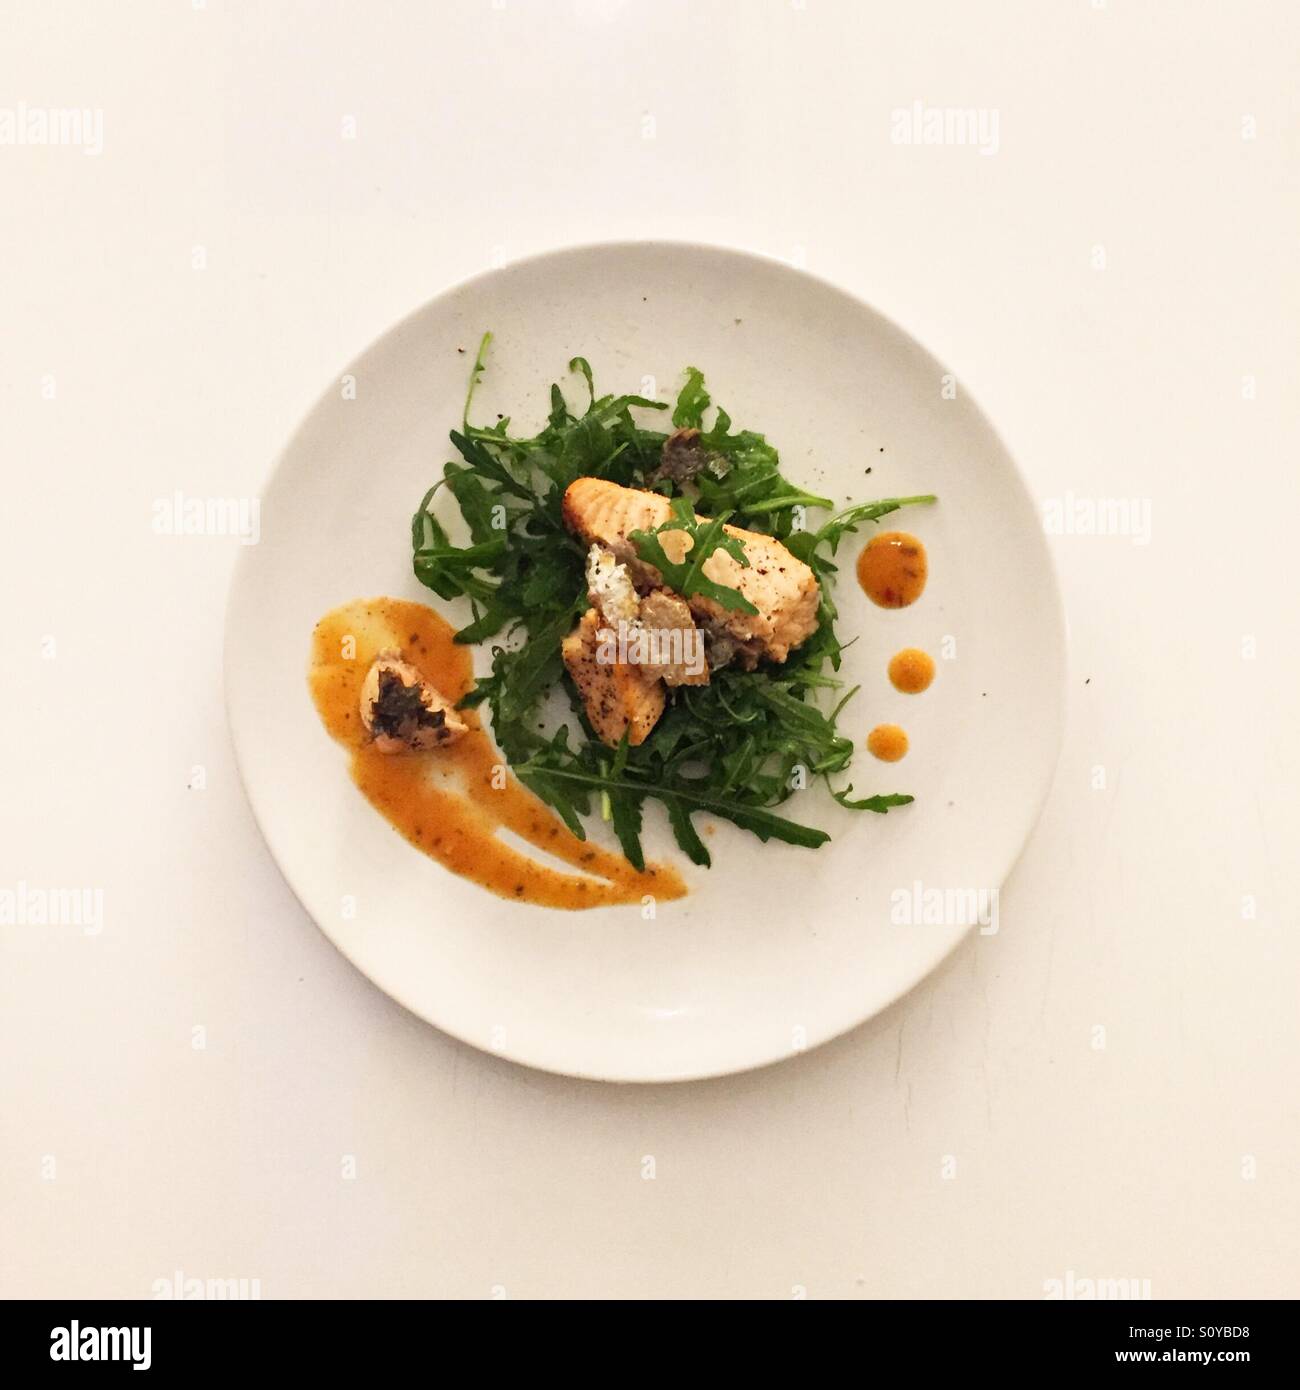 Healthy salmon fillet on a bed of rocket salad - buon appetito! Stock Photo